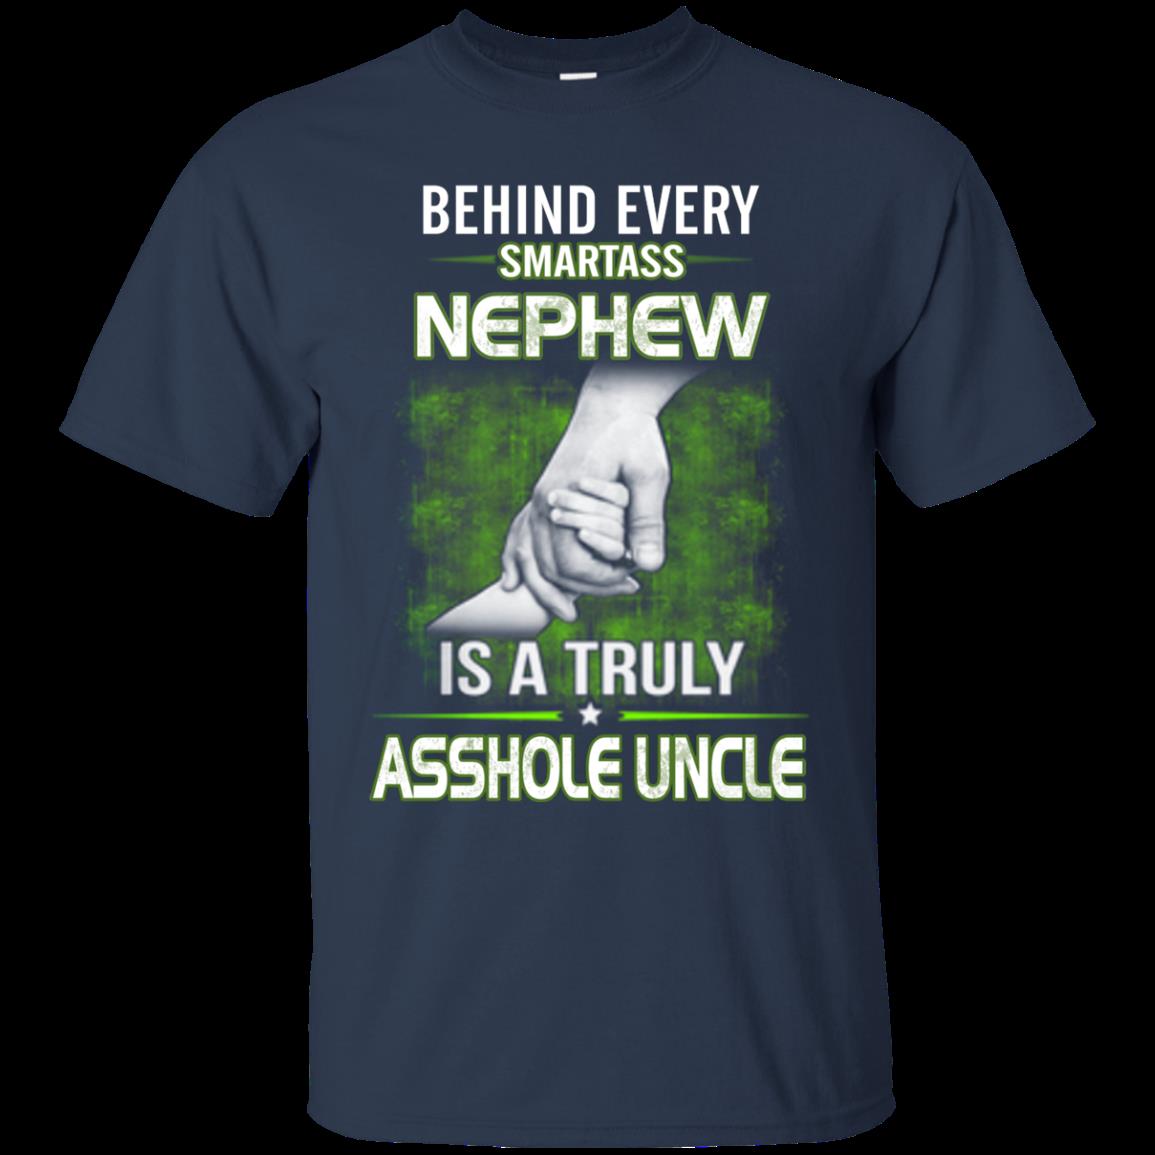 Behind Every Smartass Nephew Is A Truly Asshole Uncle T Shirt Hoodie Sweater 1